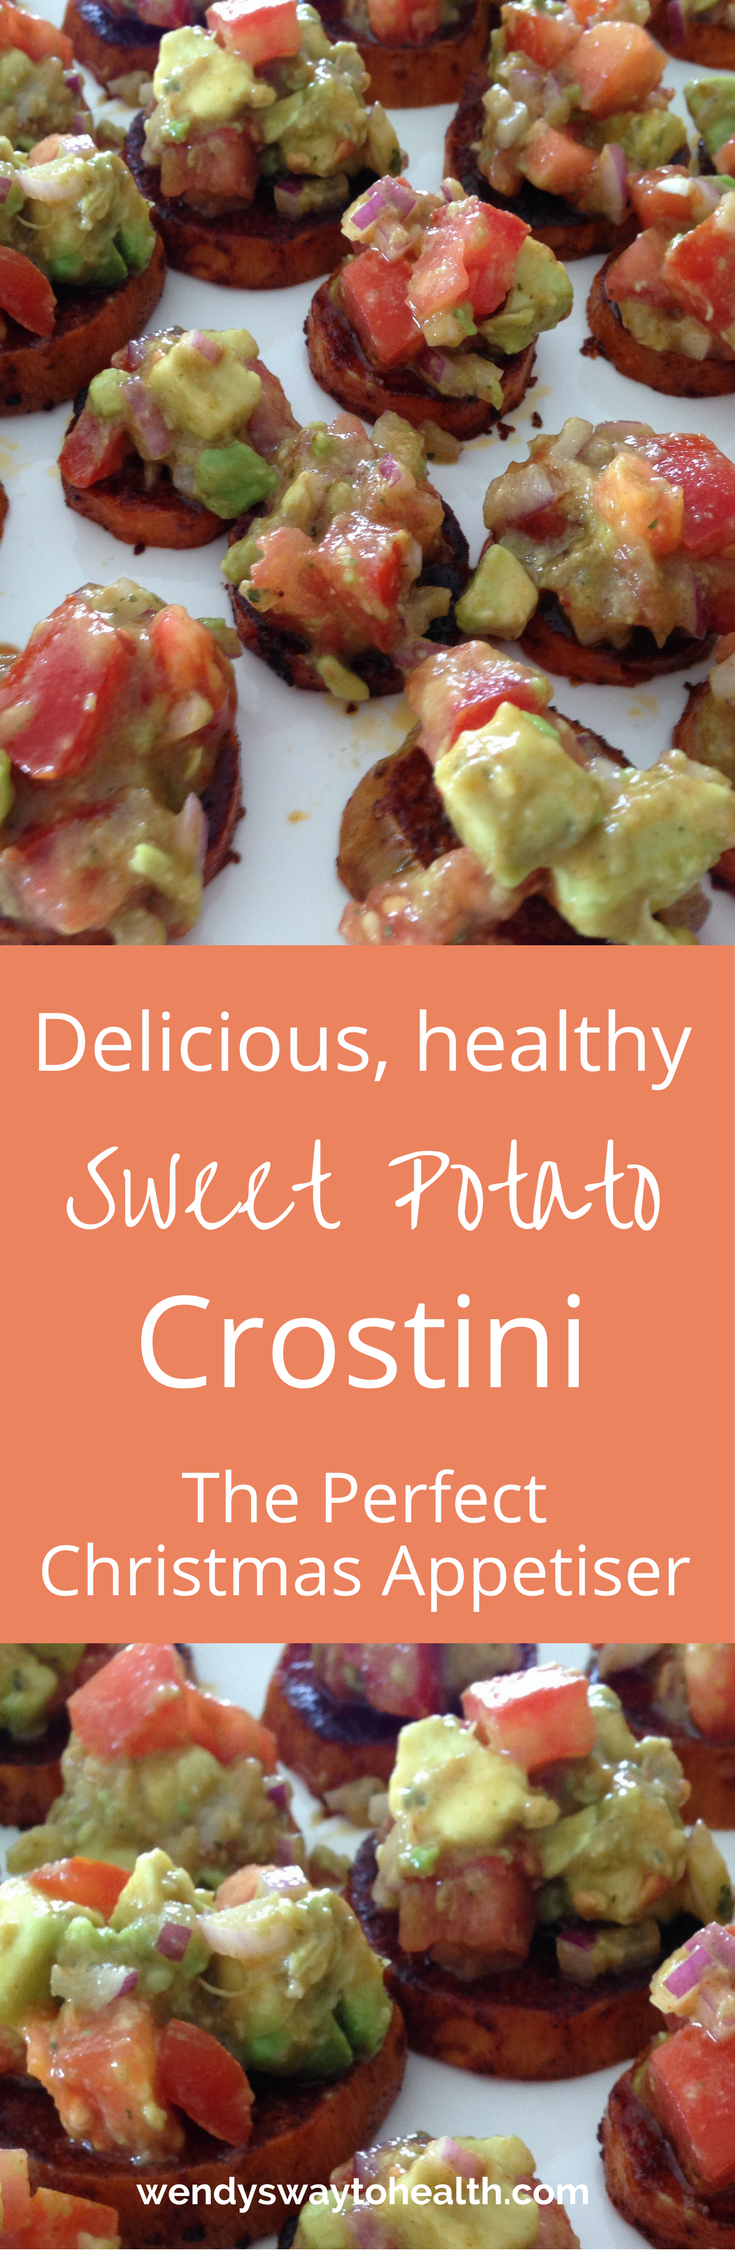 These delicious sweet potato crostini make a perfect healthy appetiser